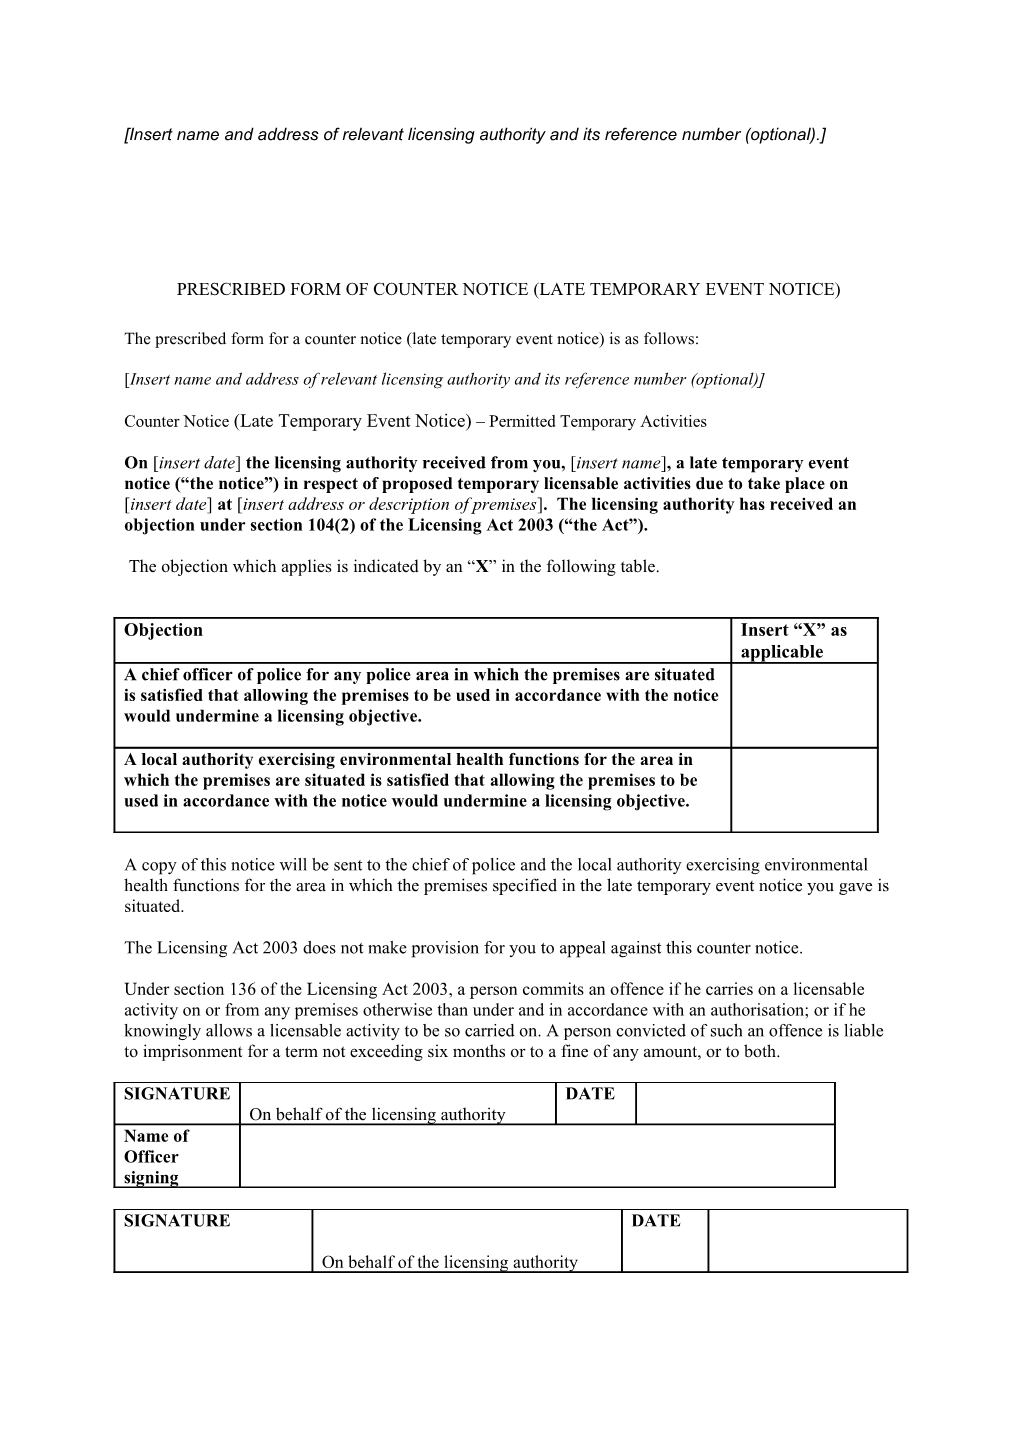 PRESCRIBED FORM of COUNTER NOTICE (LATE Temporary Event NOTICE)